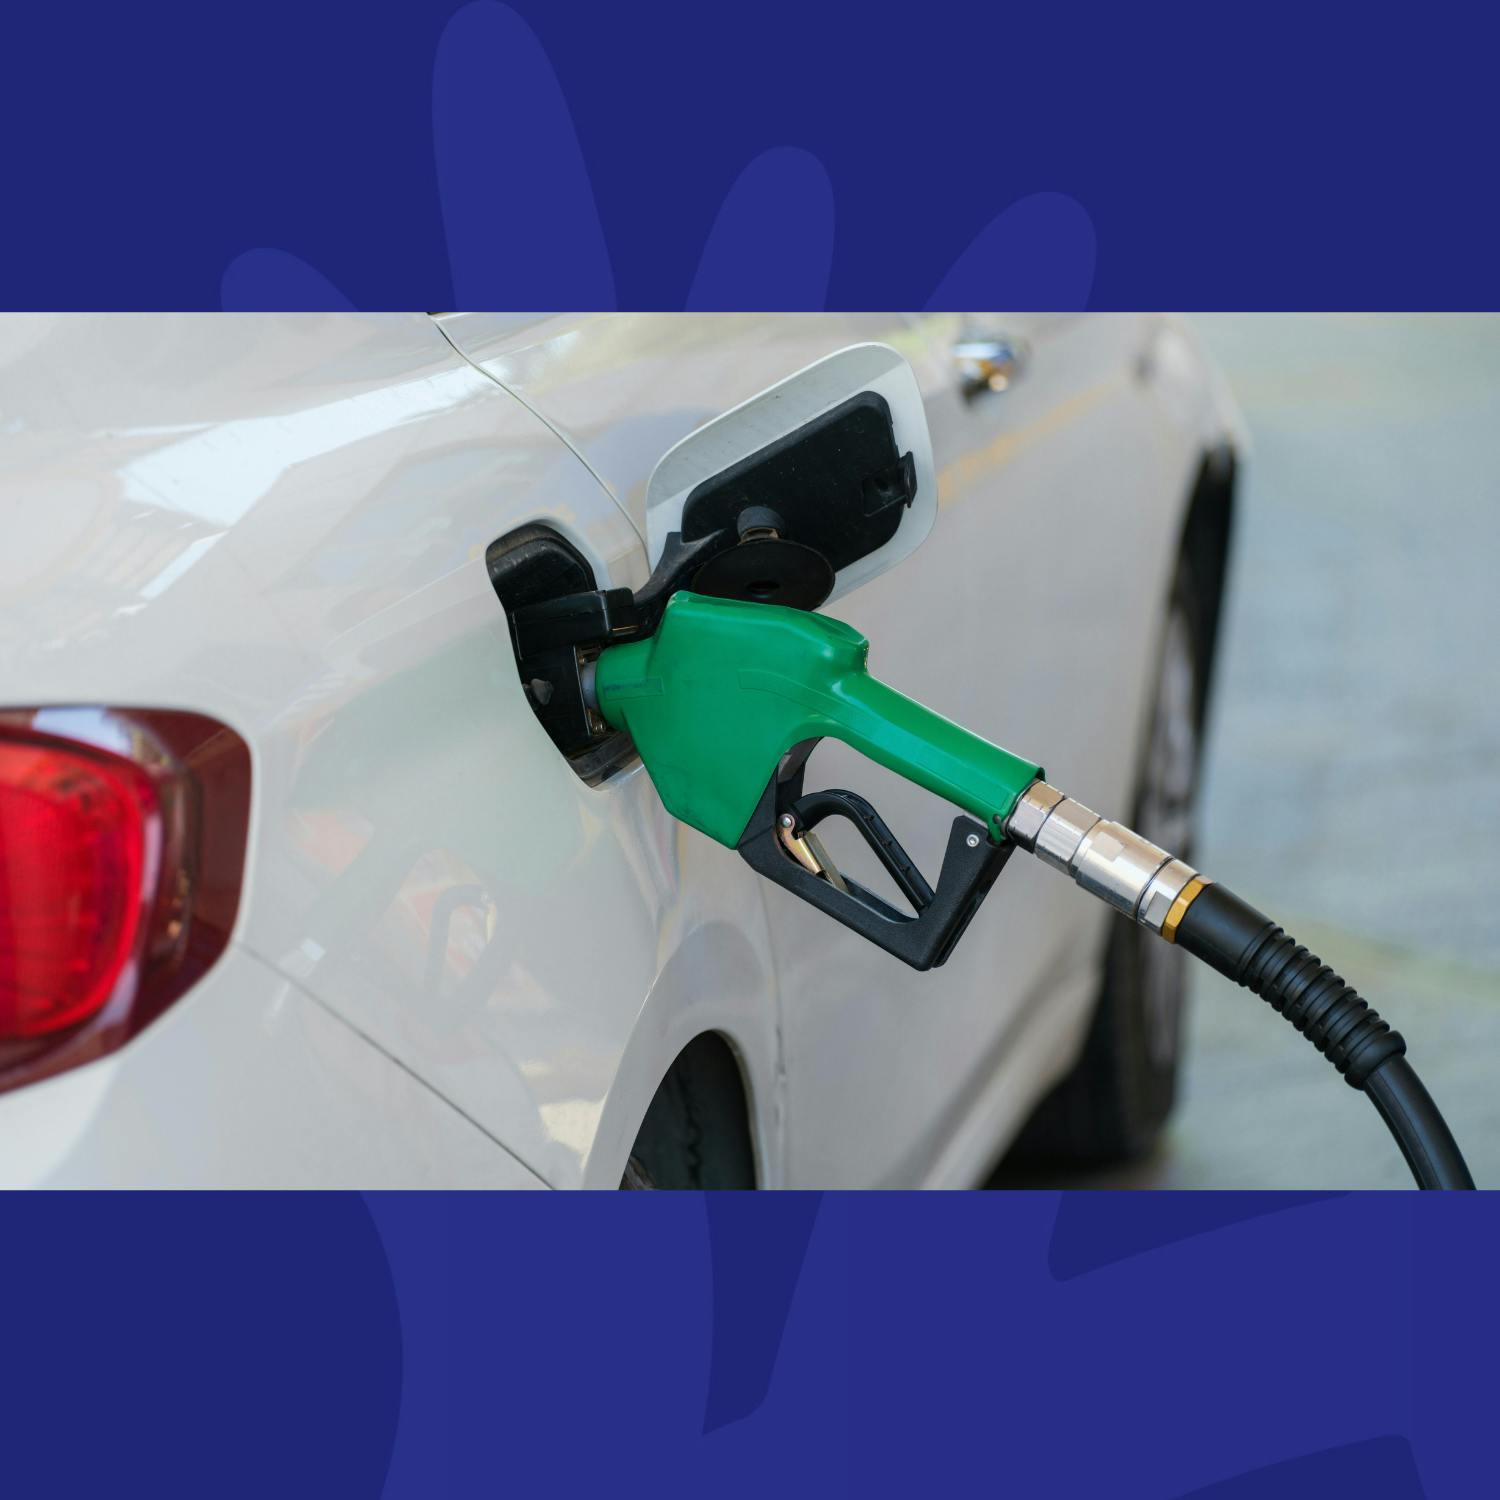 Do You Actually Save Money On Petrol When Only Half Filling Your Tank?